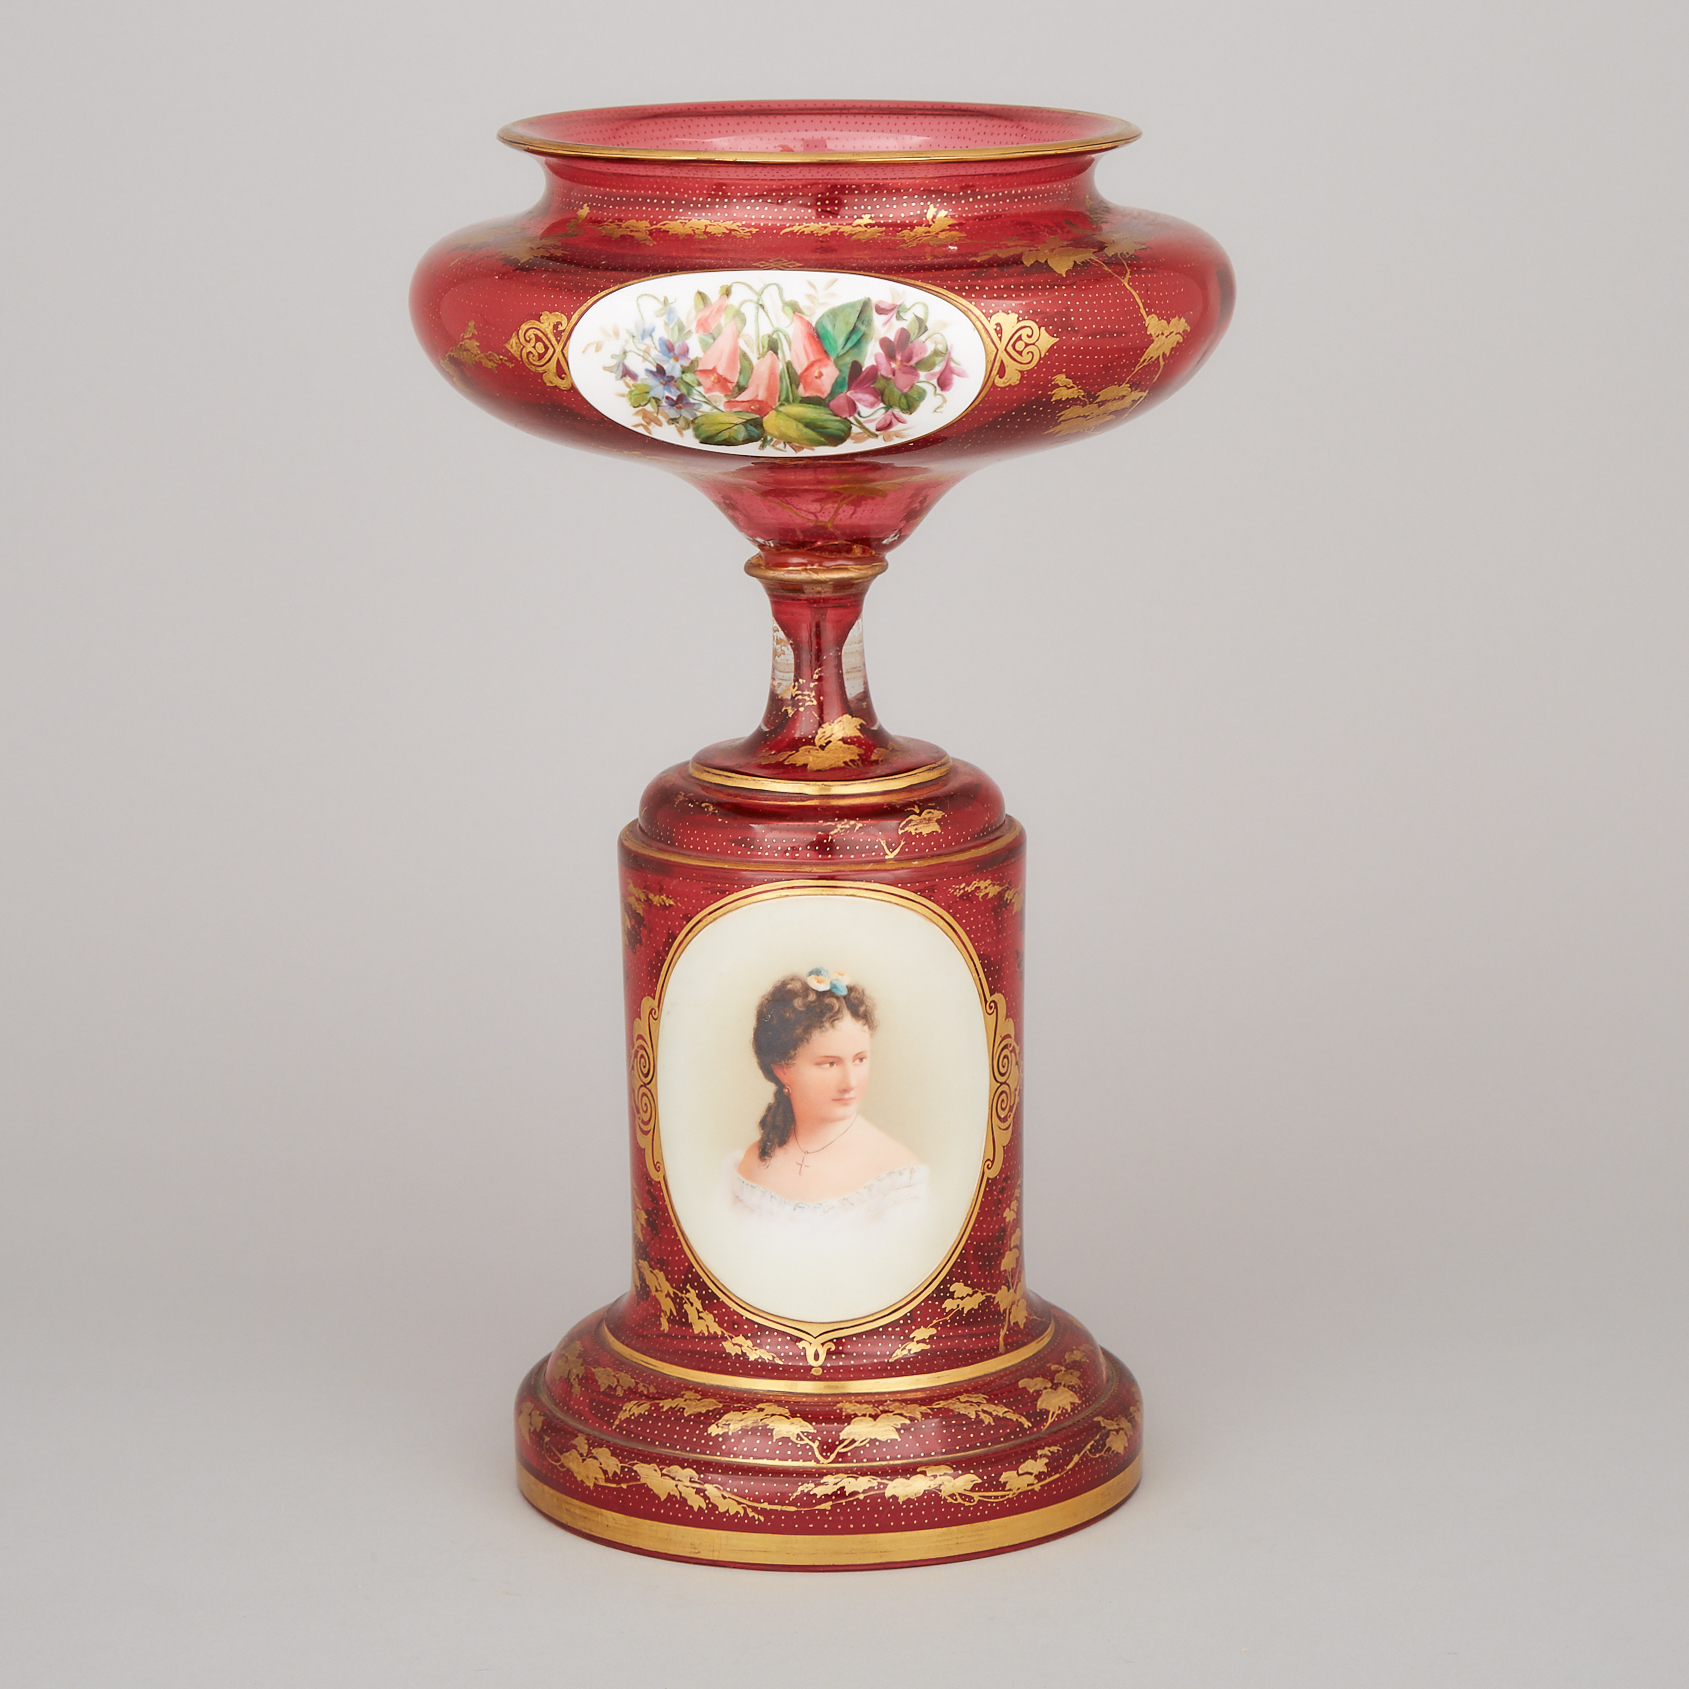 Bohemian Overlaid, Enameled and Gilt Red Glass Portrait Comport, late 19th century